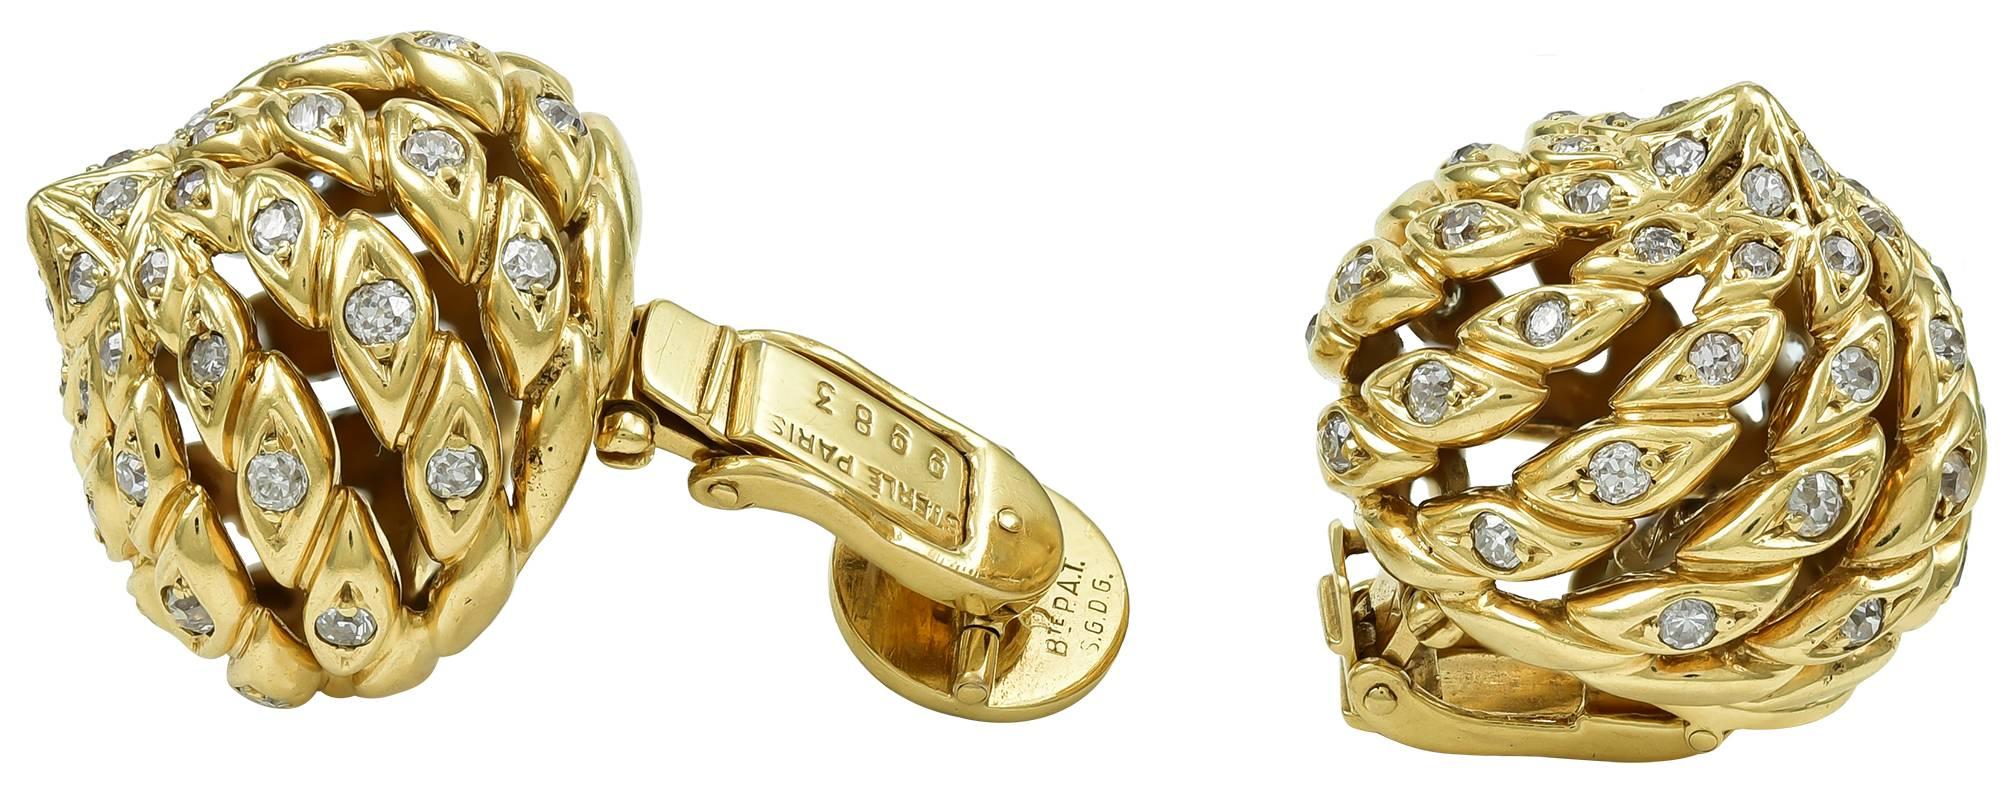 Three dimensional nut-shaped earclips designed as stylized gold and diamond ropes which rise from a circular base and swirl to a point (this motif is called 